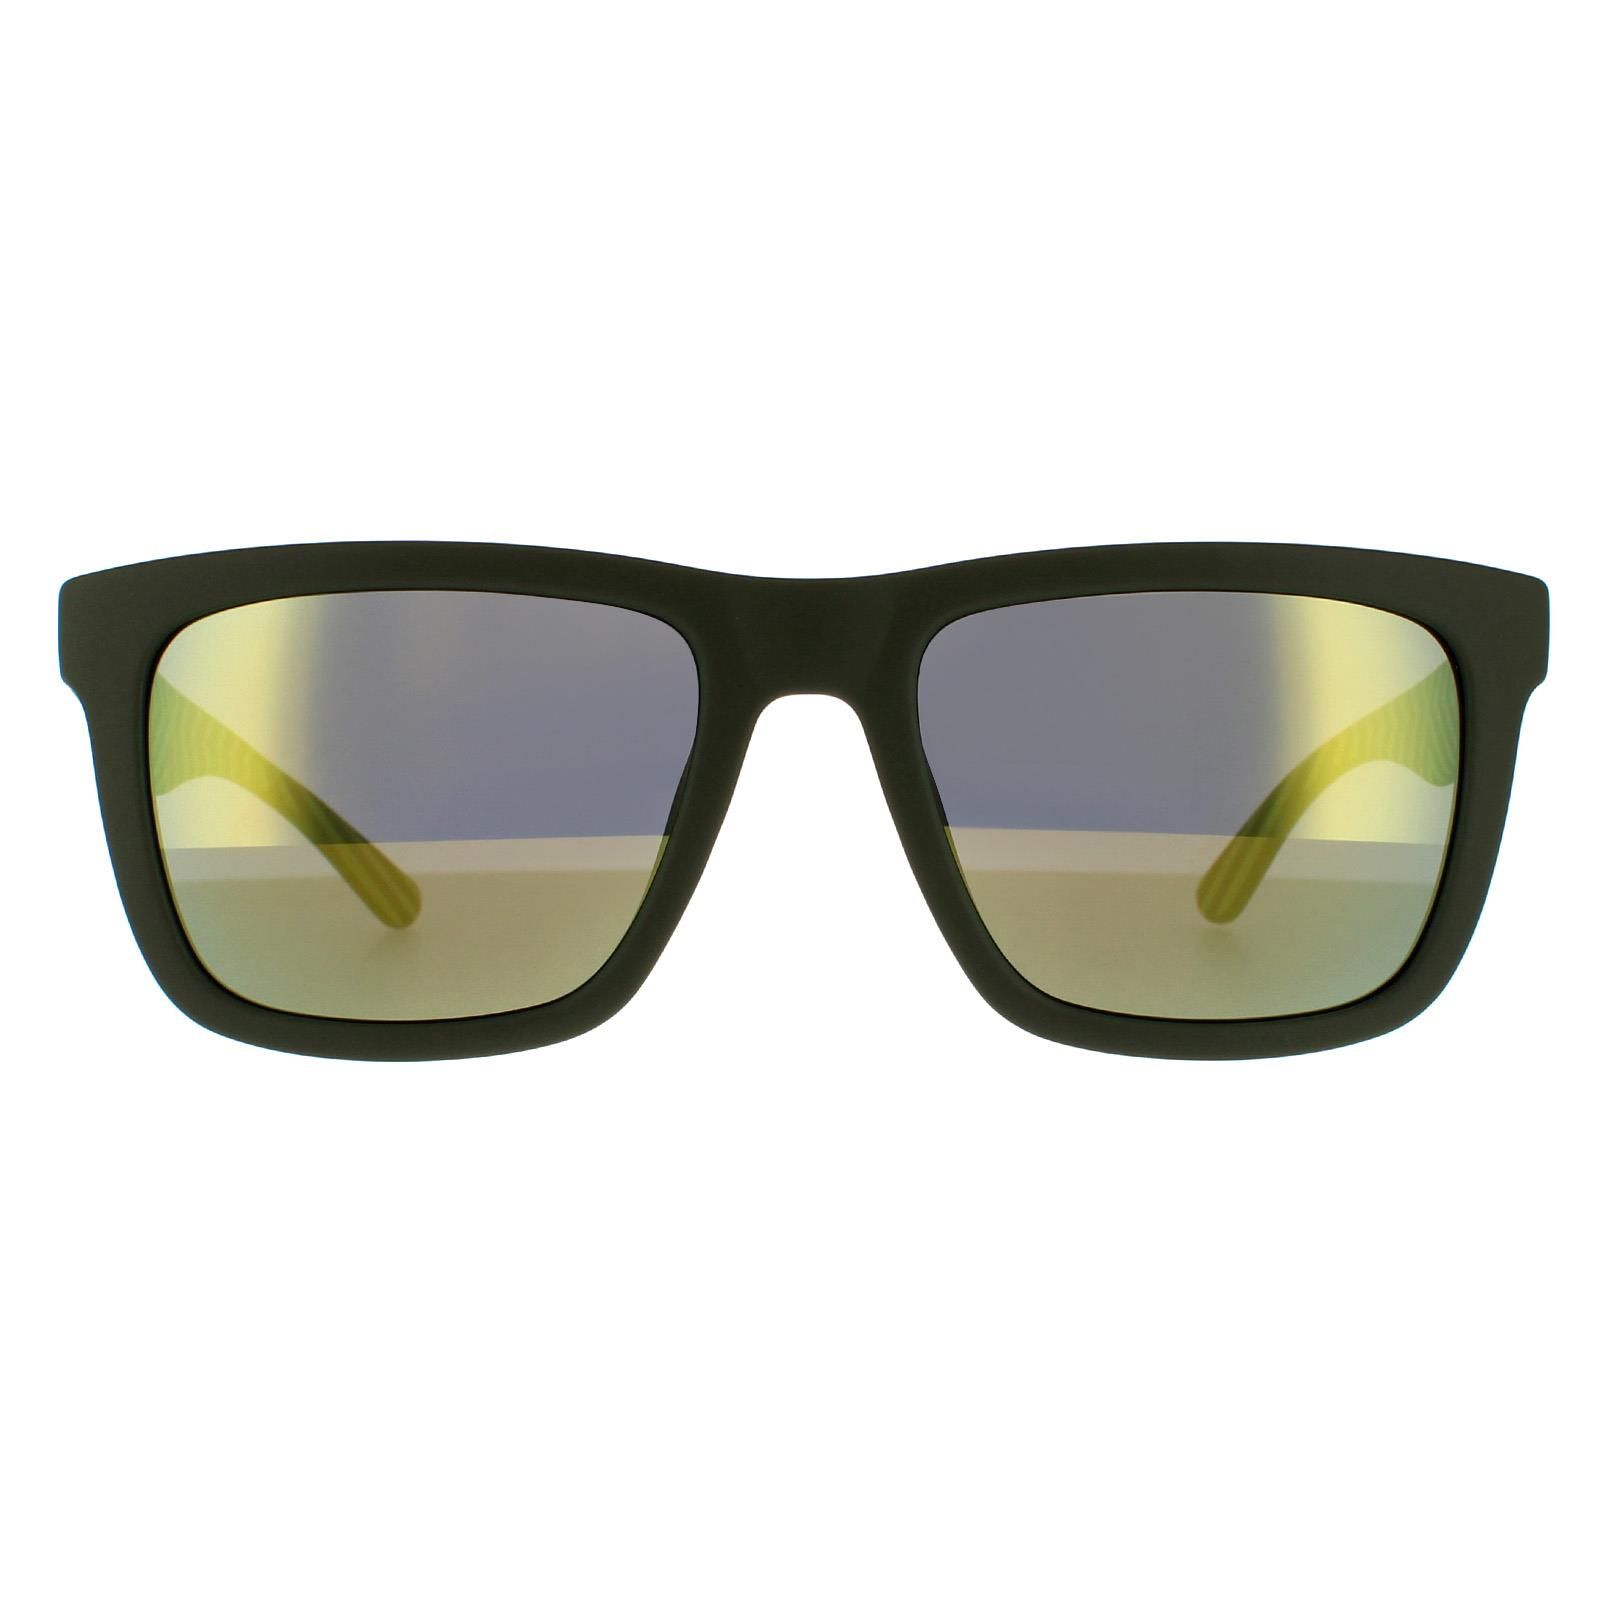 Lacoste Sunglasses L750S 318 Matte Green Green Mirror are a simple style with a classic rectangular look with the instantly recognisable alligator logo on the temple. AN interesting black and white inside pattern completes the look.